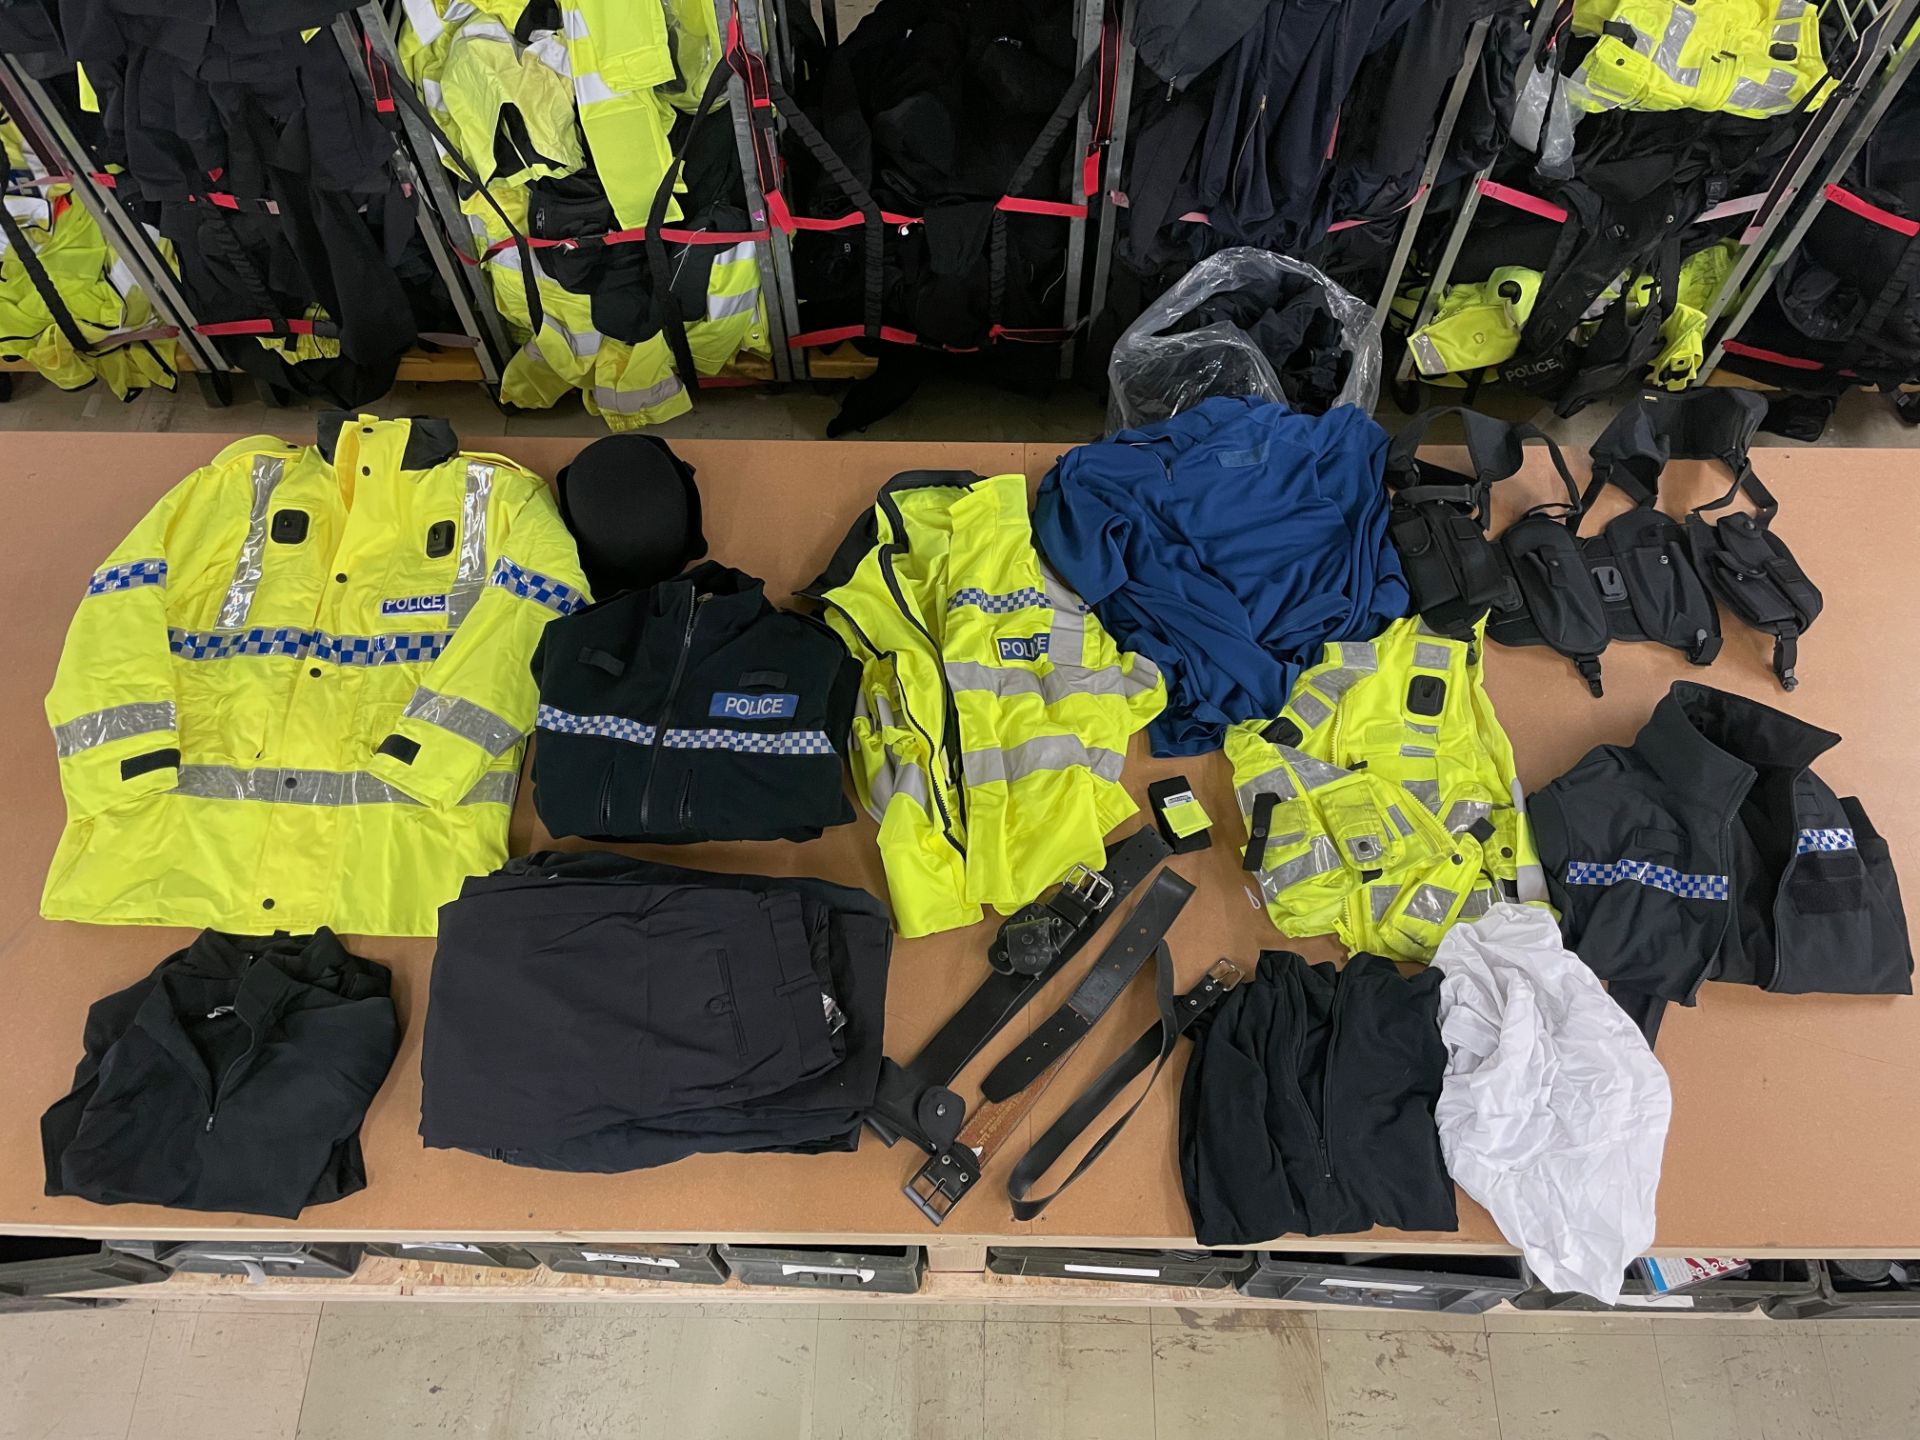 5 X BAGS STUFFED WITH EX POLICE UNIFORM CLOTHING & ACCESSORIES - RRP £1375.00 - NO VAT ON HAMMER